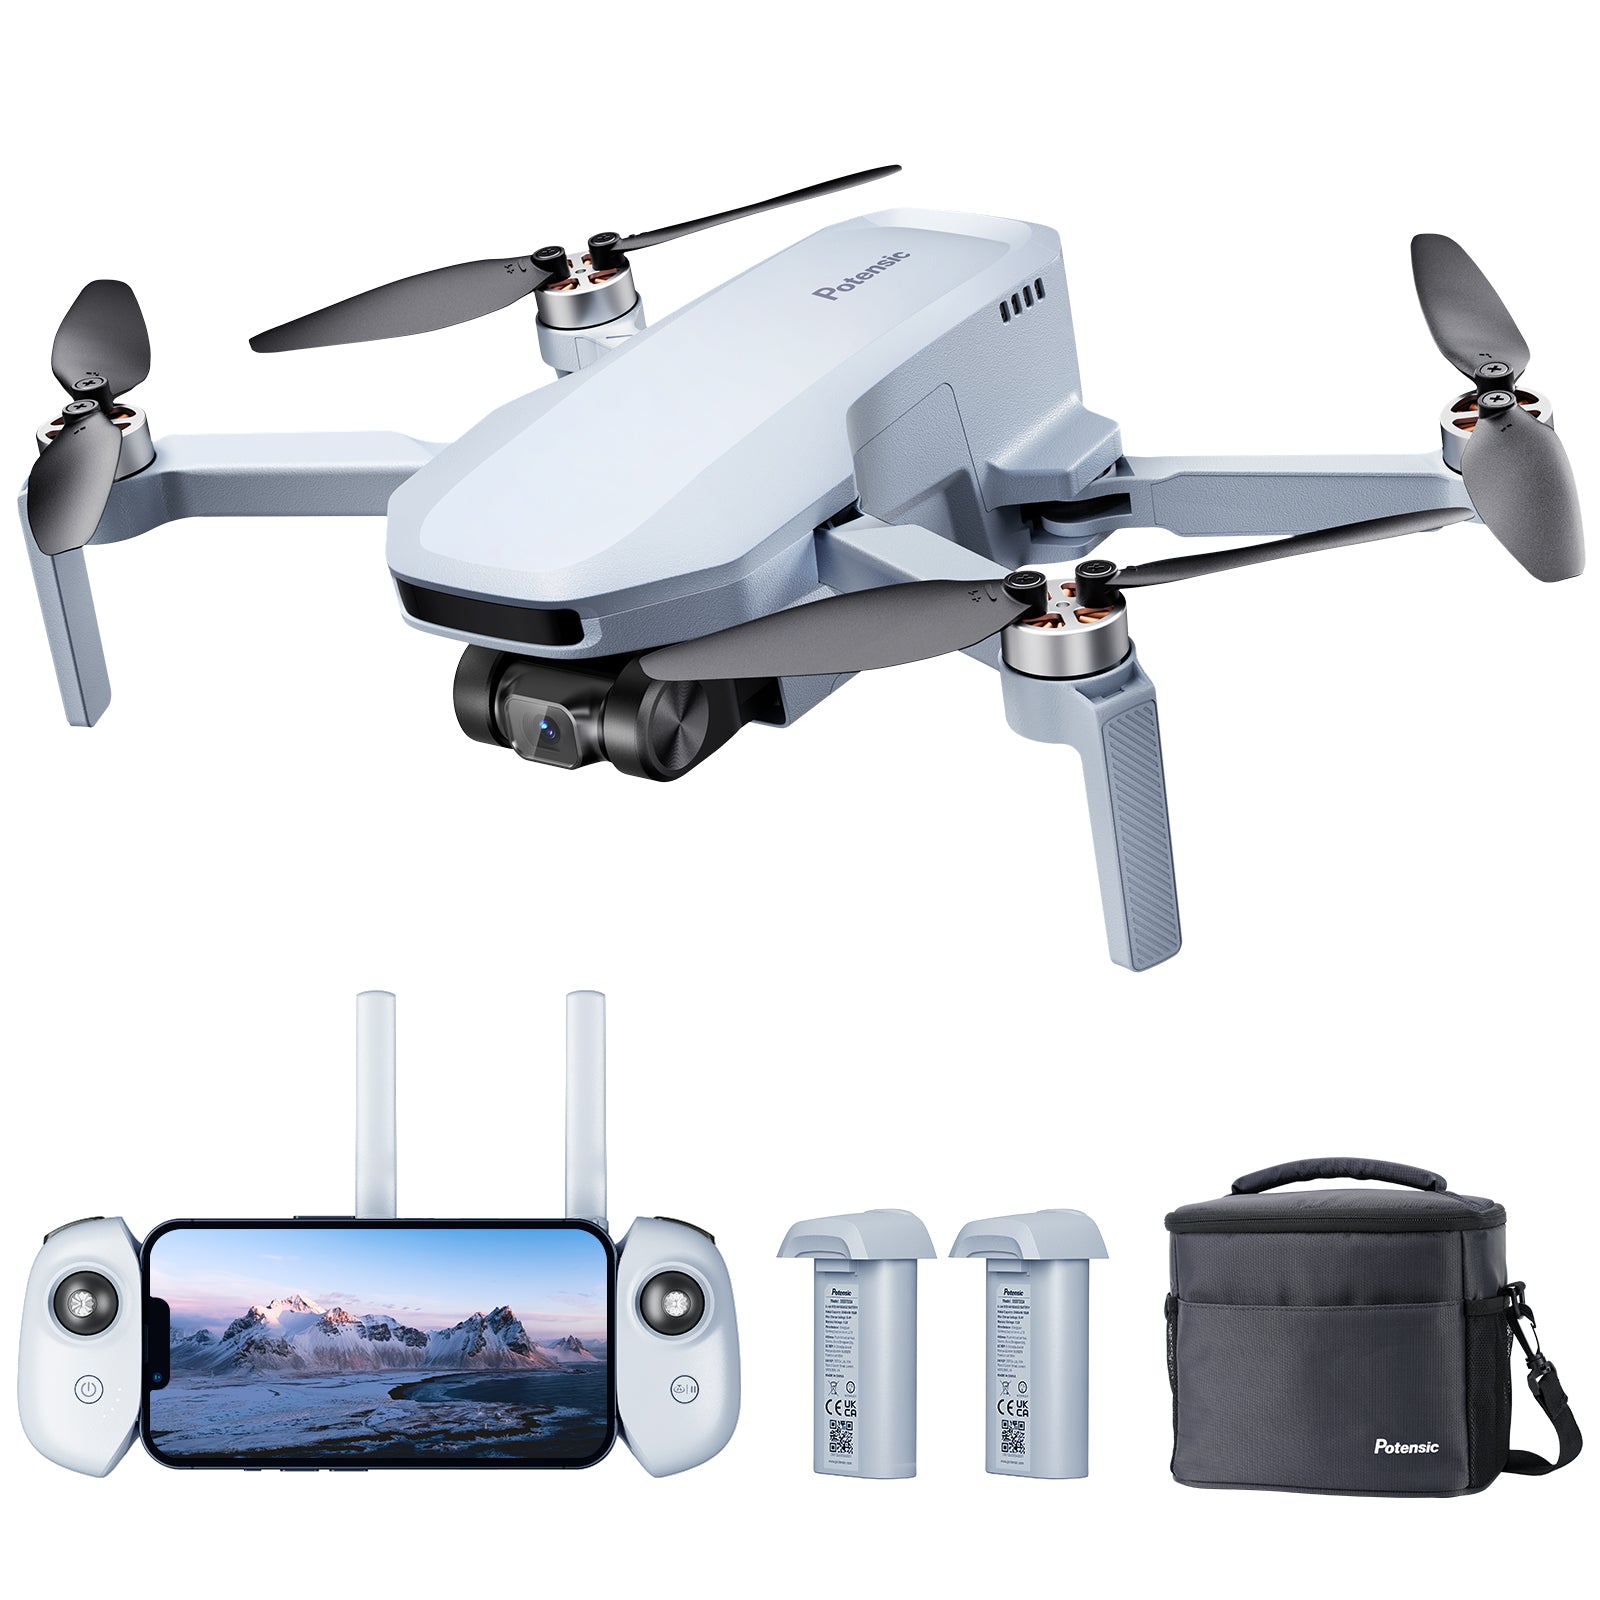 Re-paste persecution Drive out ATOM SE Sub 250g Foldable GPS Drone with 4K HD EIS Camera – Potensic